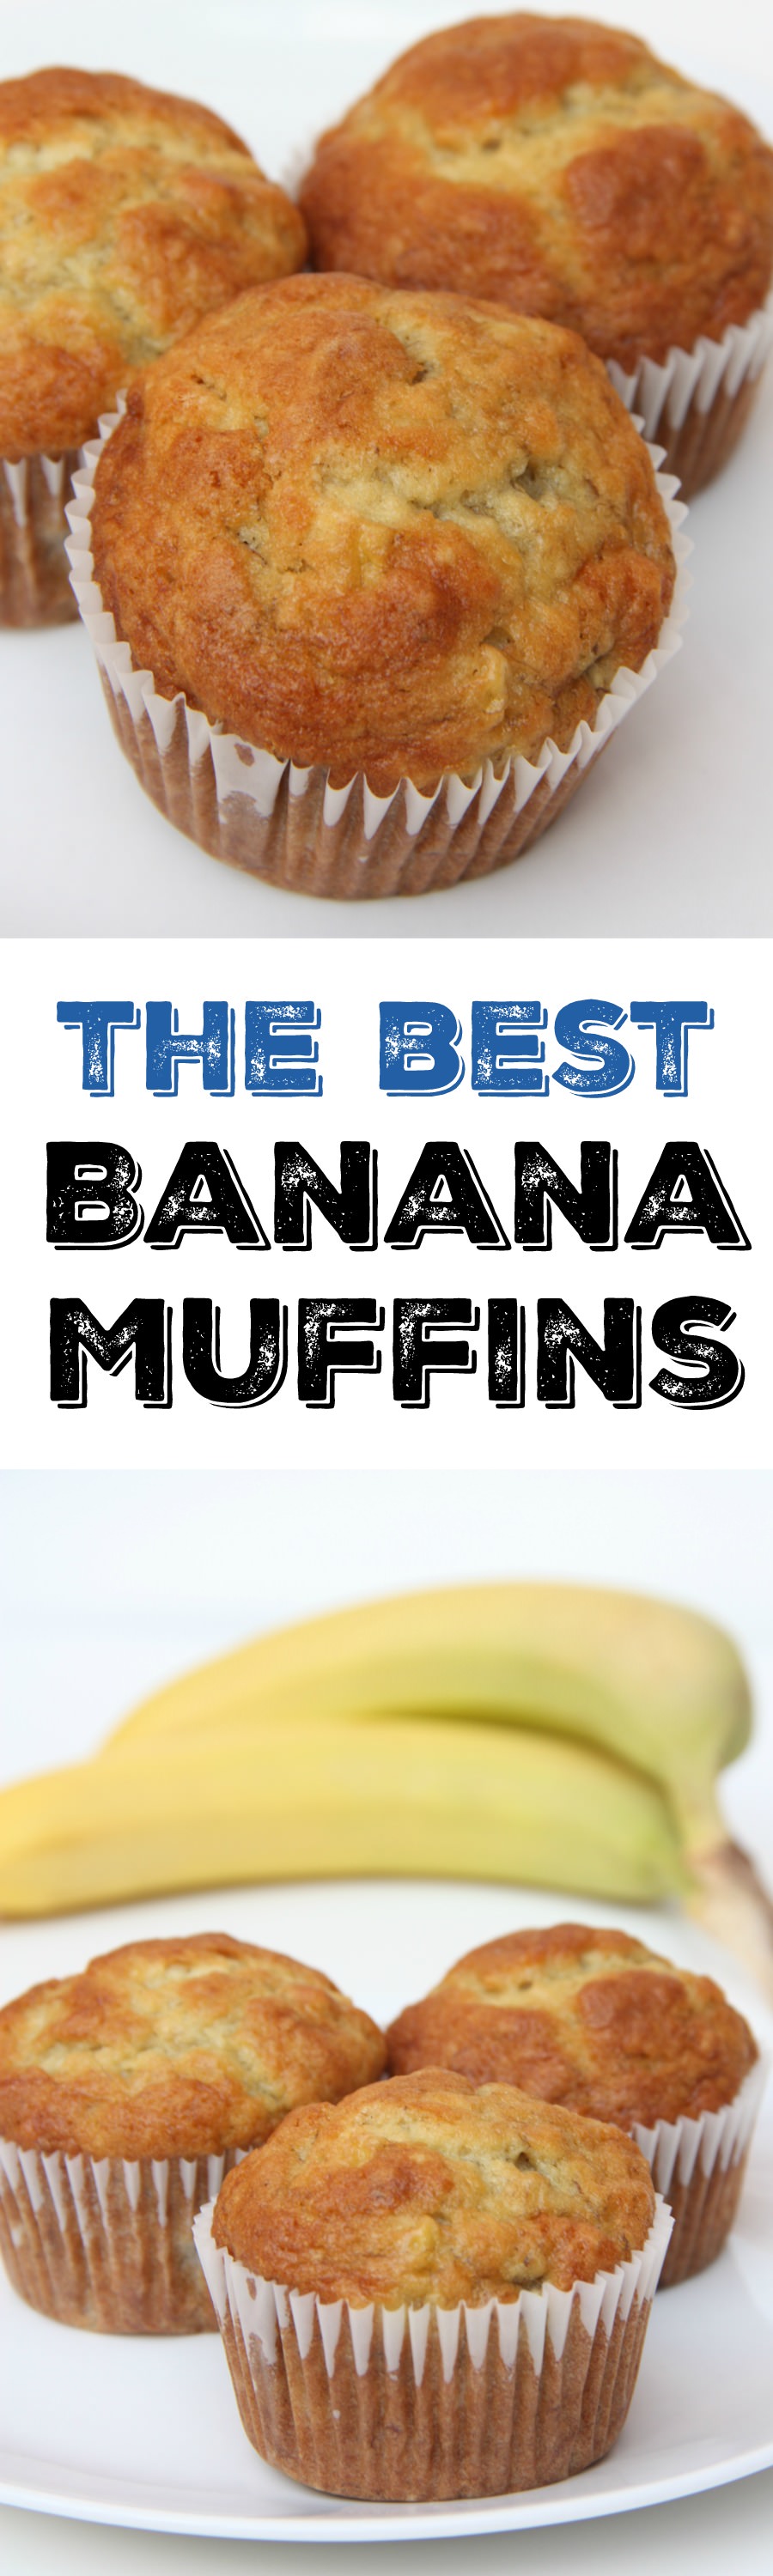 The best banana muffins hands down! These banana muffins are super moist on the inside and crispy on the outside. Add chocolate chips or your favorite nuts! #bananamuffins via @mymommystyle